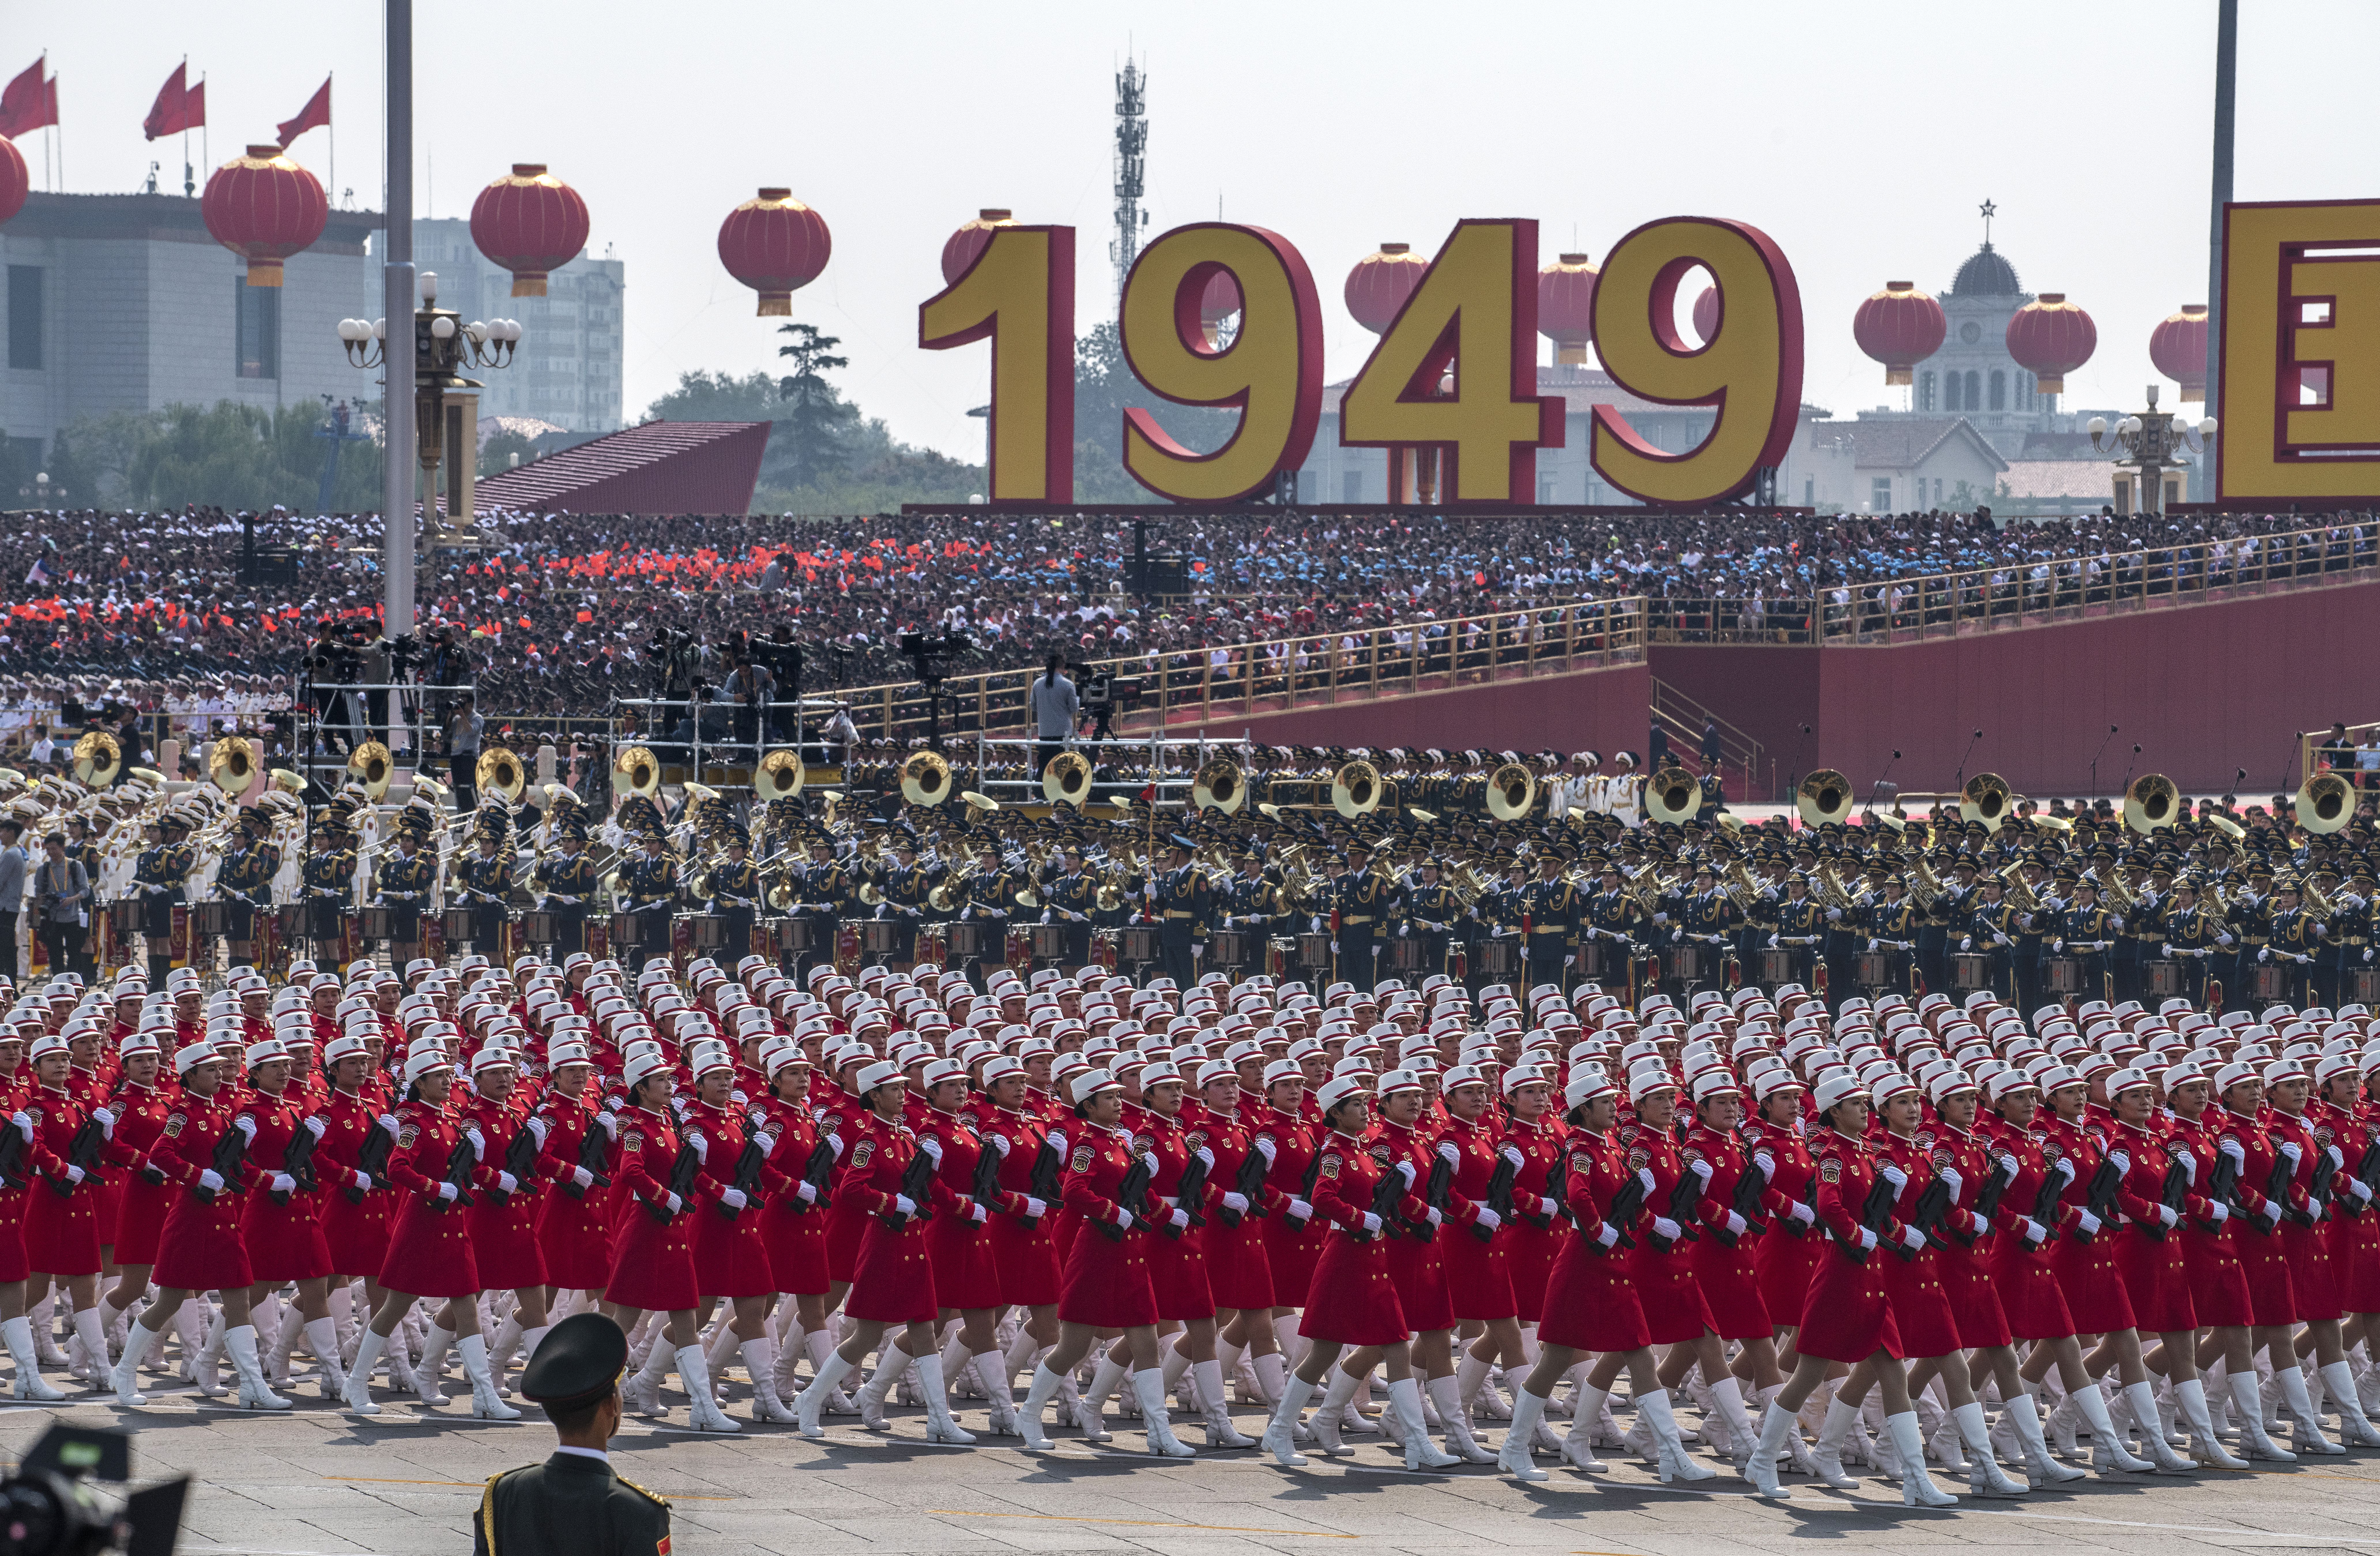 Chinese female soldiers march in in formation during a parade to celebrate the 70th Anniversary of the founding of the People's Republic of China